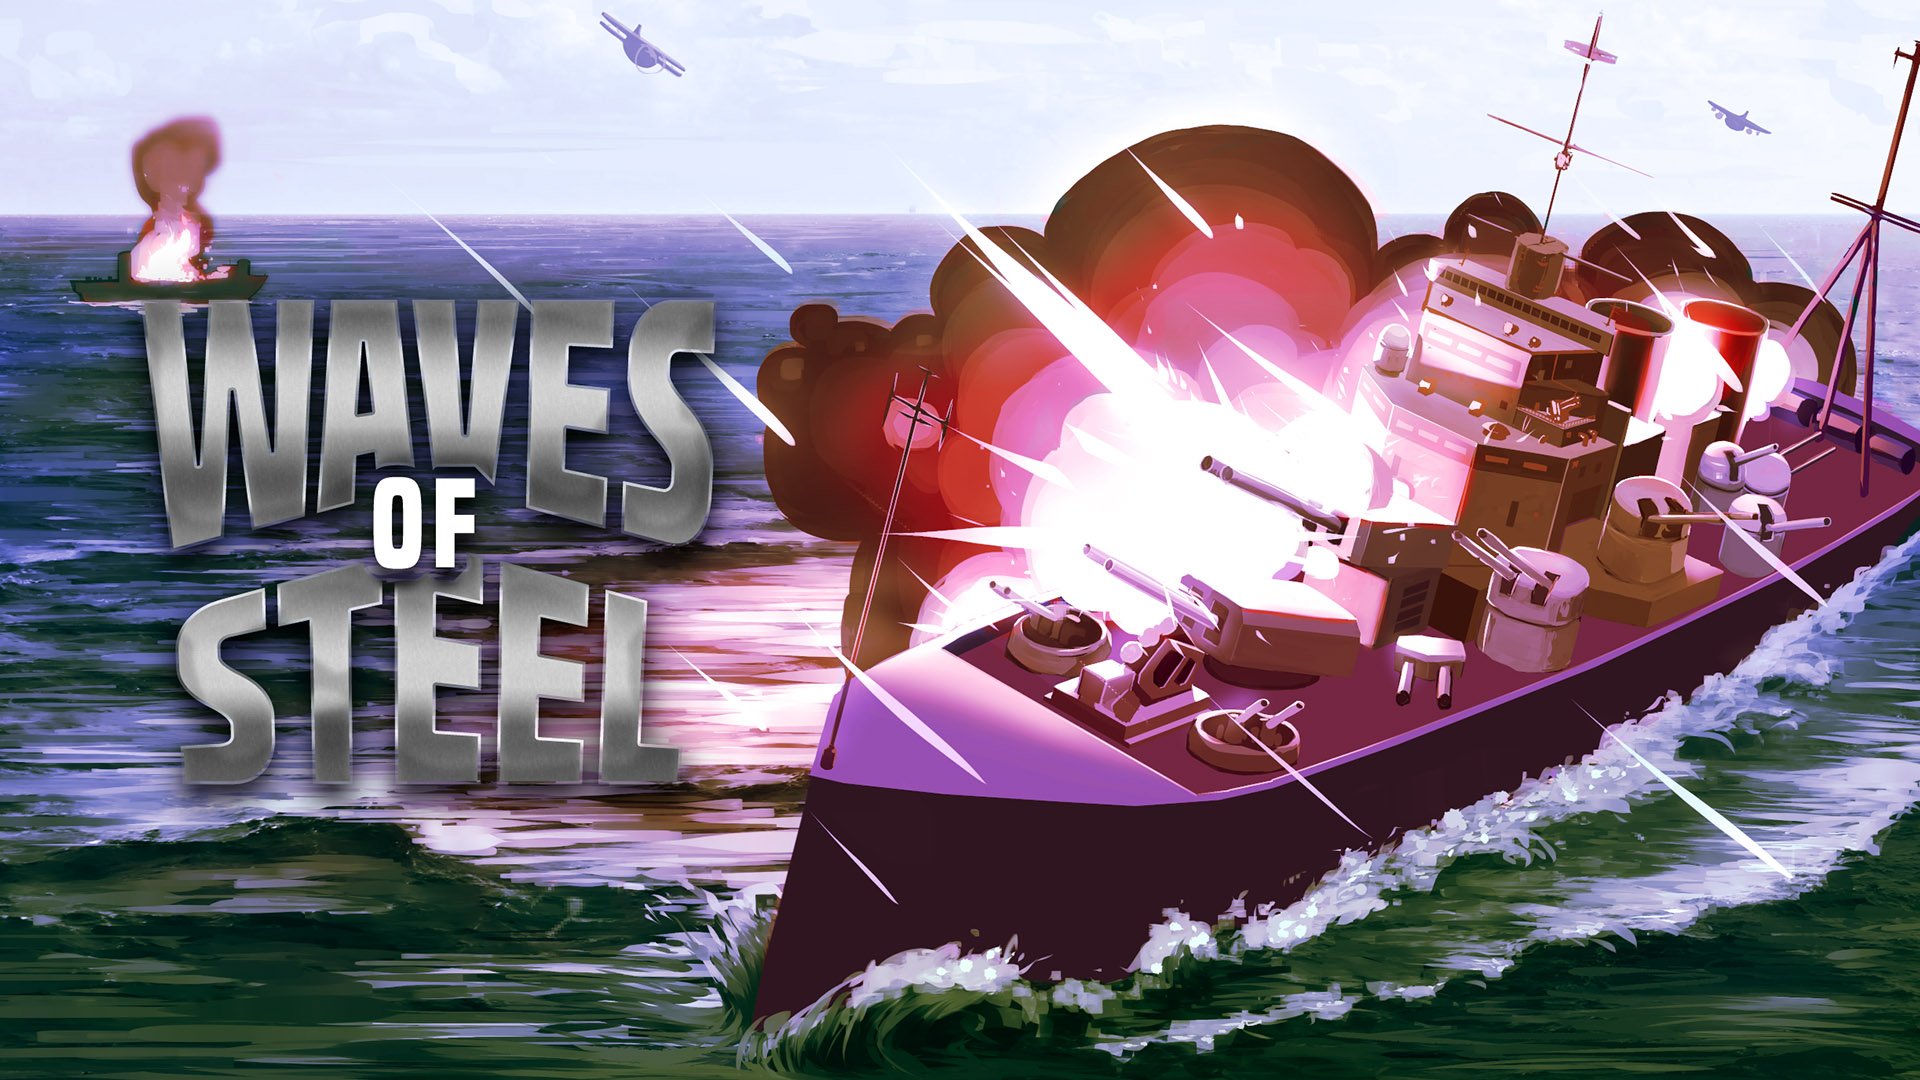 Boomgaard kortademigheid klok Arcade naval combat simulation game Waves of Steel launches February 6,  2023 for PC, later for Xbox Series - Gematsu